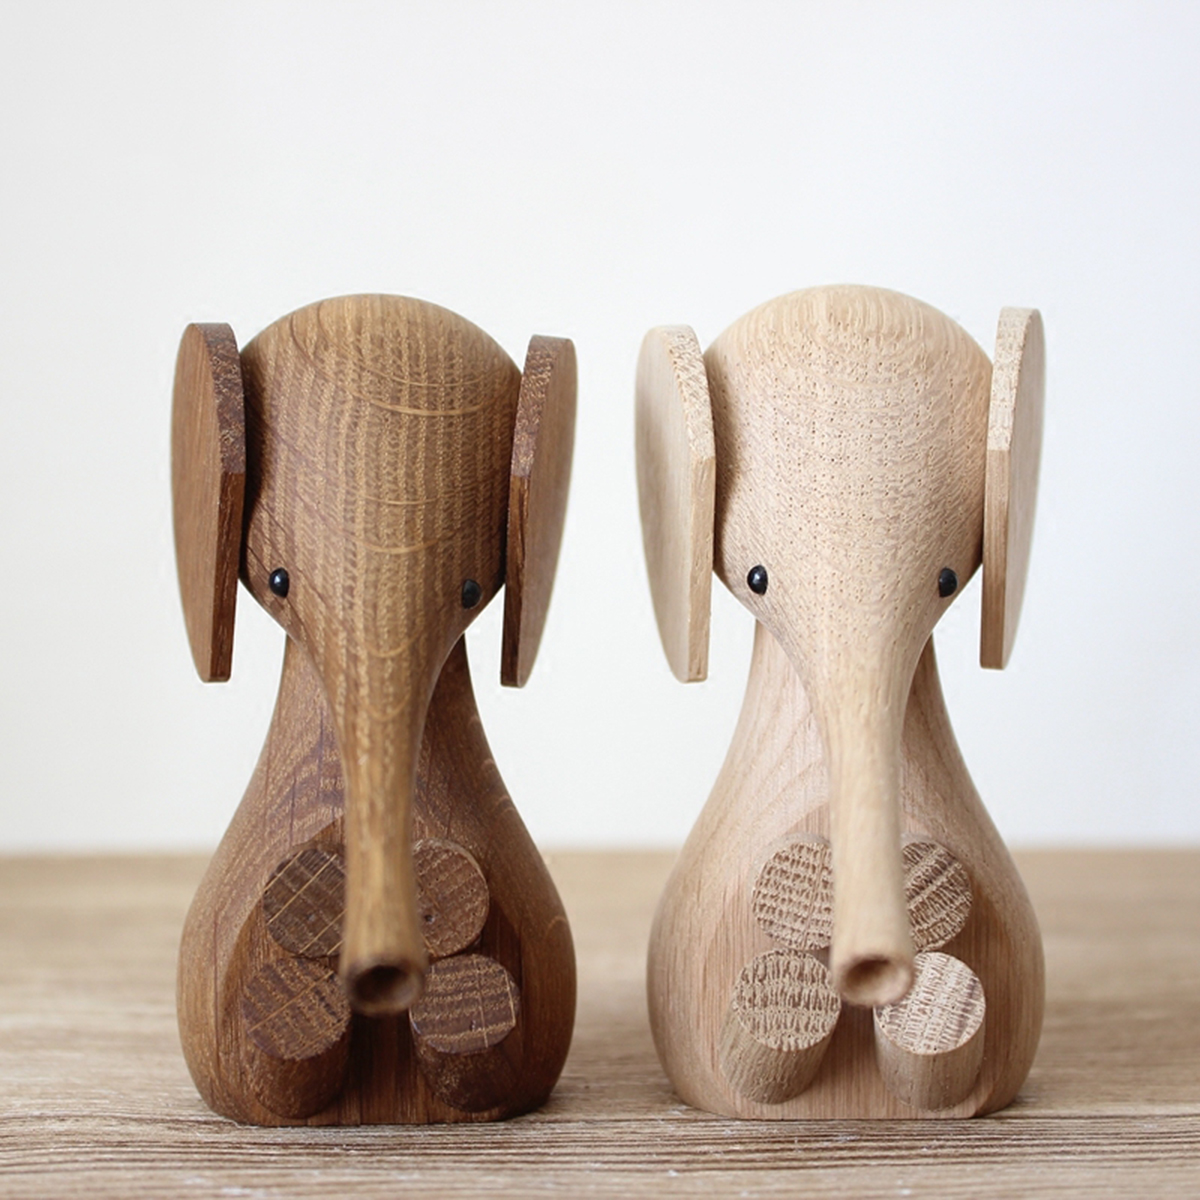 Adjustable-Handicraft-Elephant-Wooden-Animal-Doll-Smooth-Surface-Home-Decorations-Gift-1640775-3